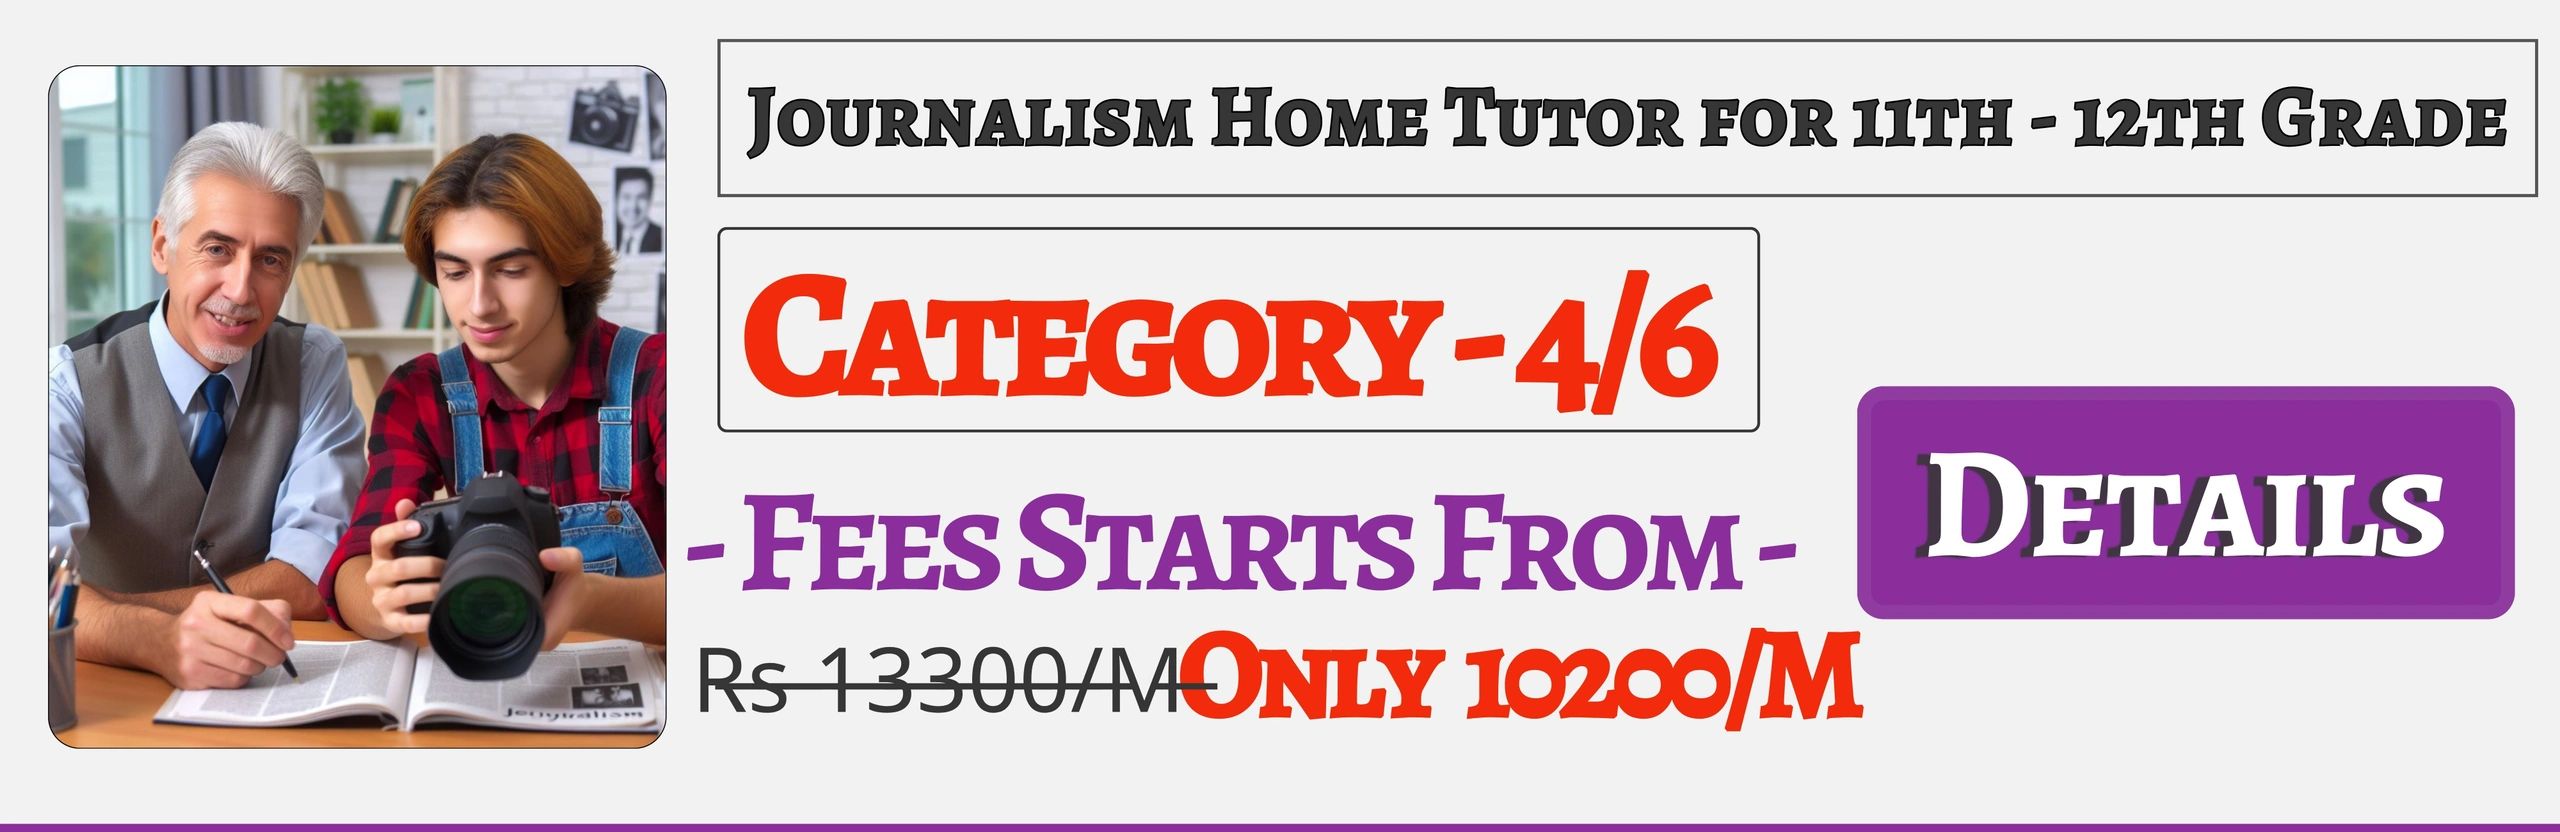 Book Best Nearby Journalism Home Tuition Tutors For 11th & 12th In Jaipur , Fees Only 10200/M